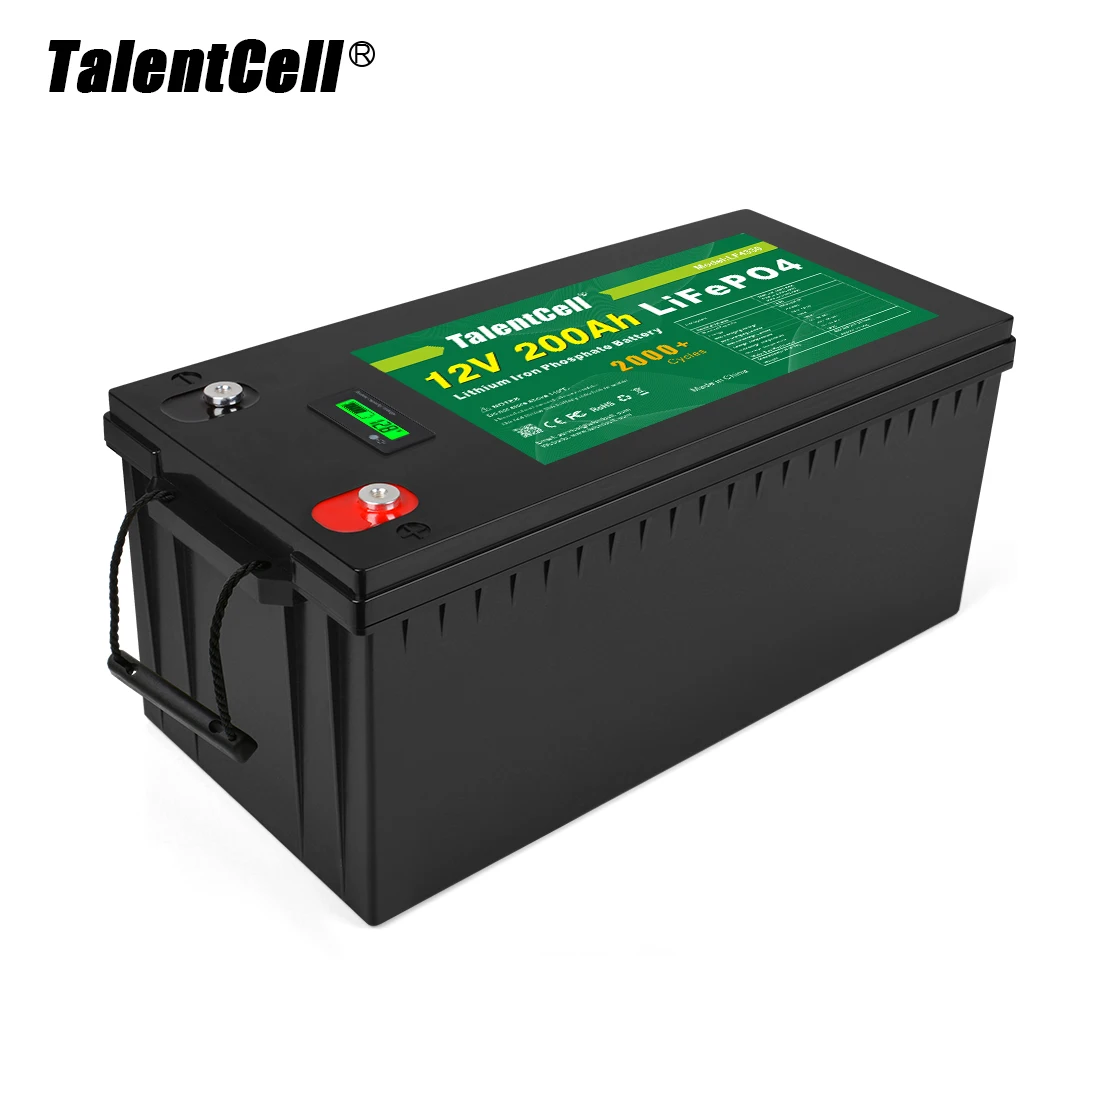 New Technology 2021 Solar Dropshipping Sourcing Agent 12v 200ah Lithium Battery Lifepo4